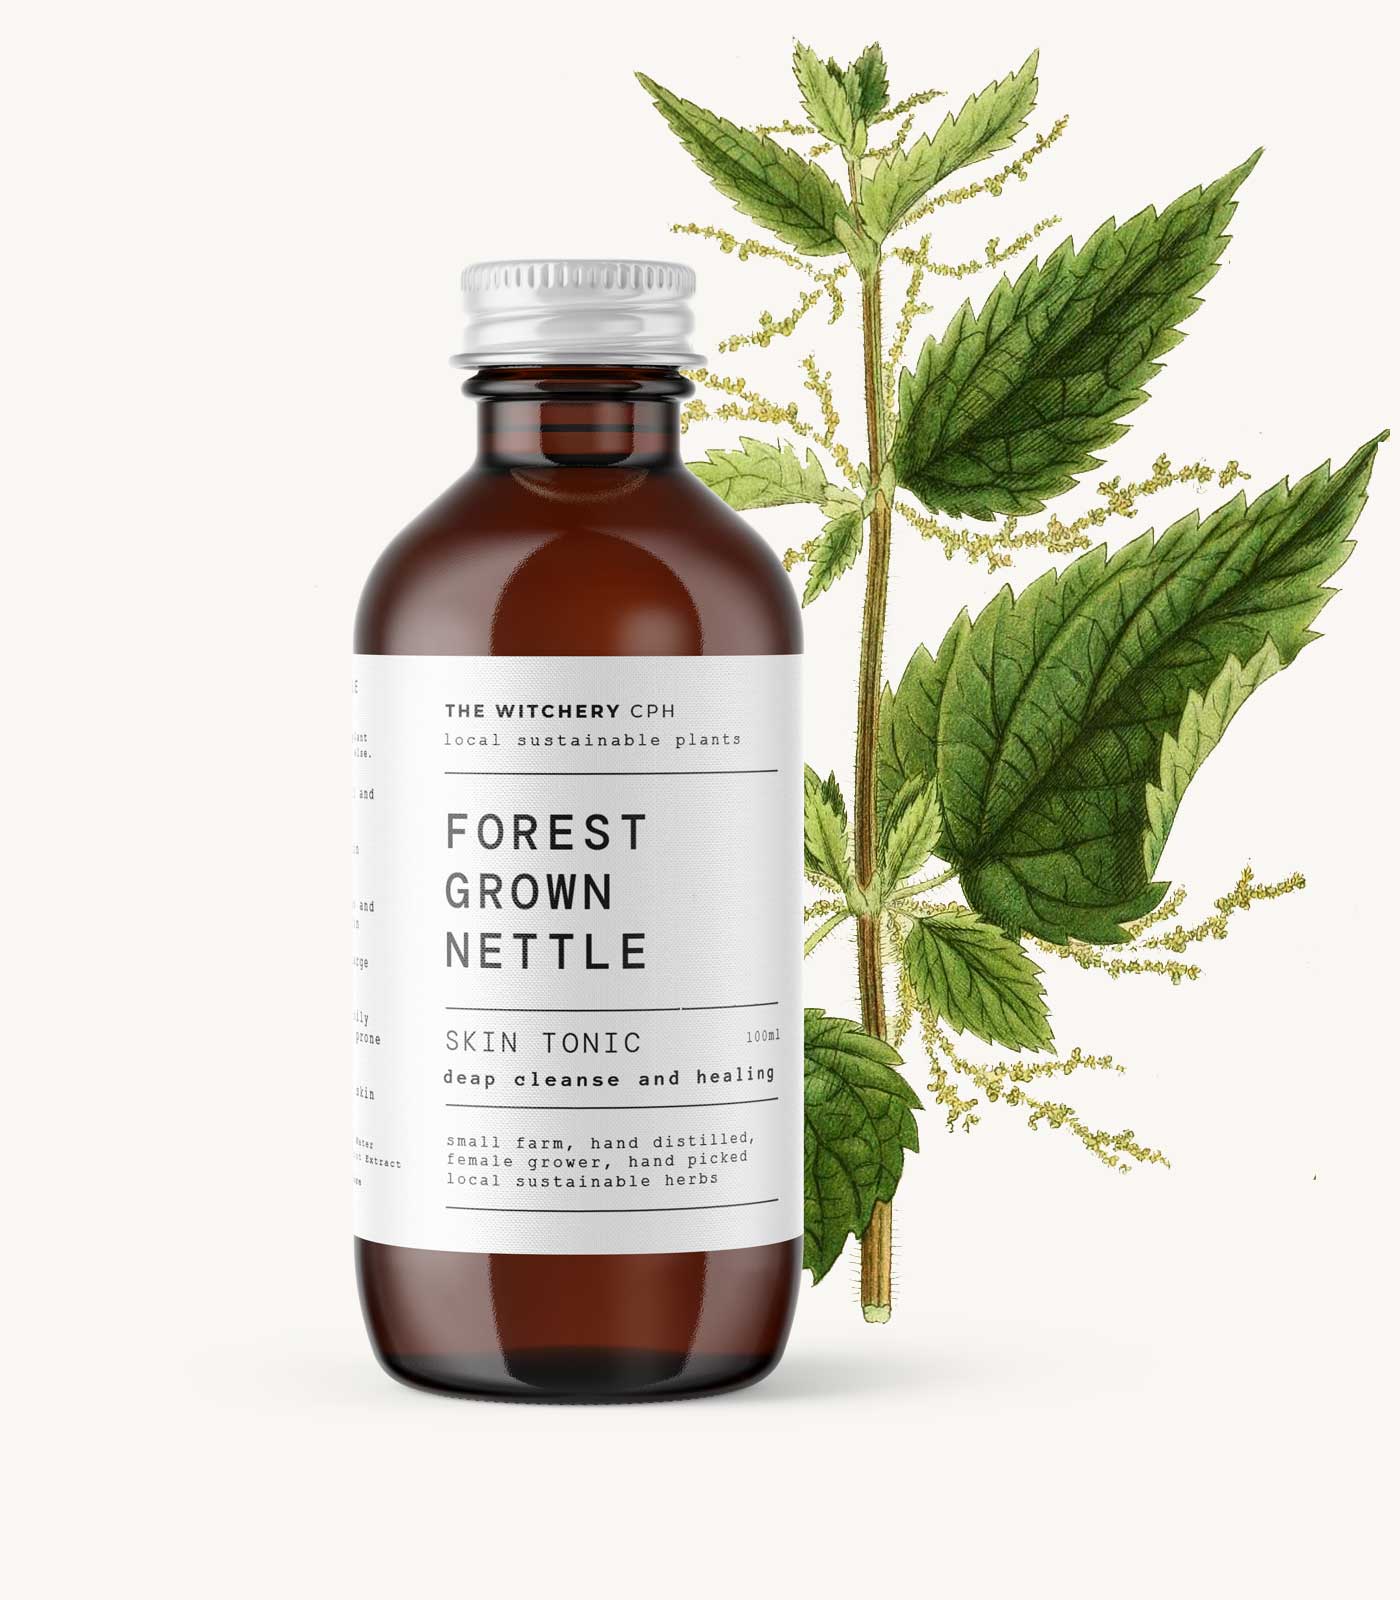 Forest Grown Nettle Skin Tonic - The Witchery CPH